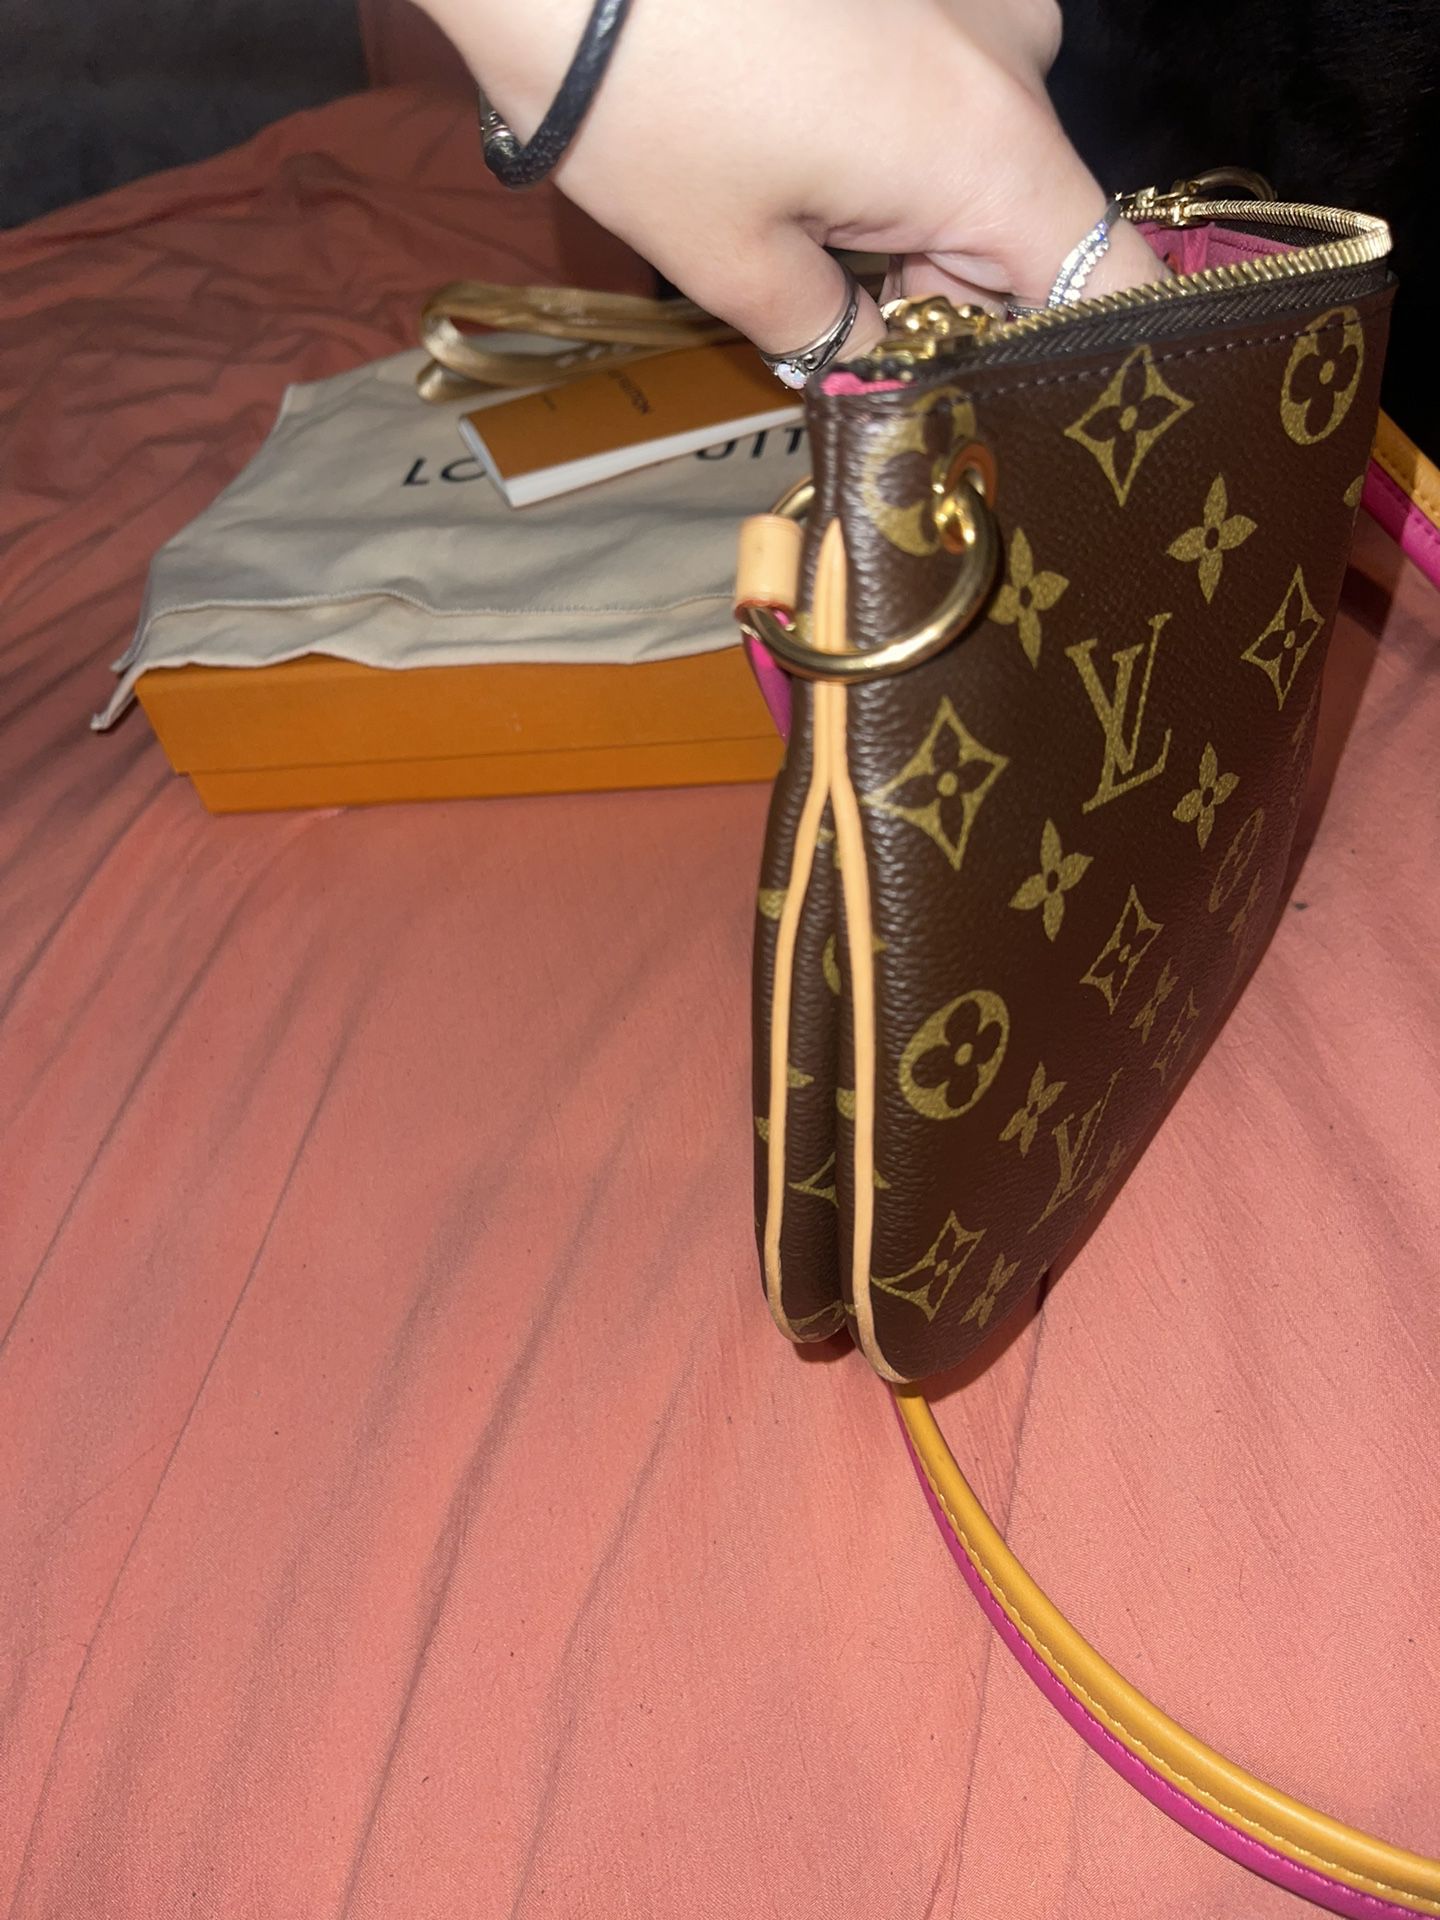 Drouot Louis Vuitton Crossbody for Sale in Fort Worth, TX - OfferUp